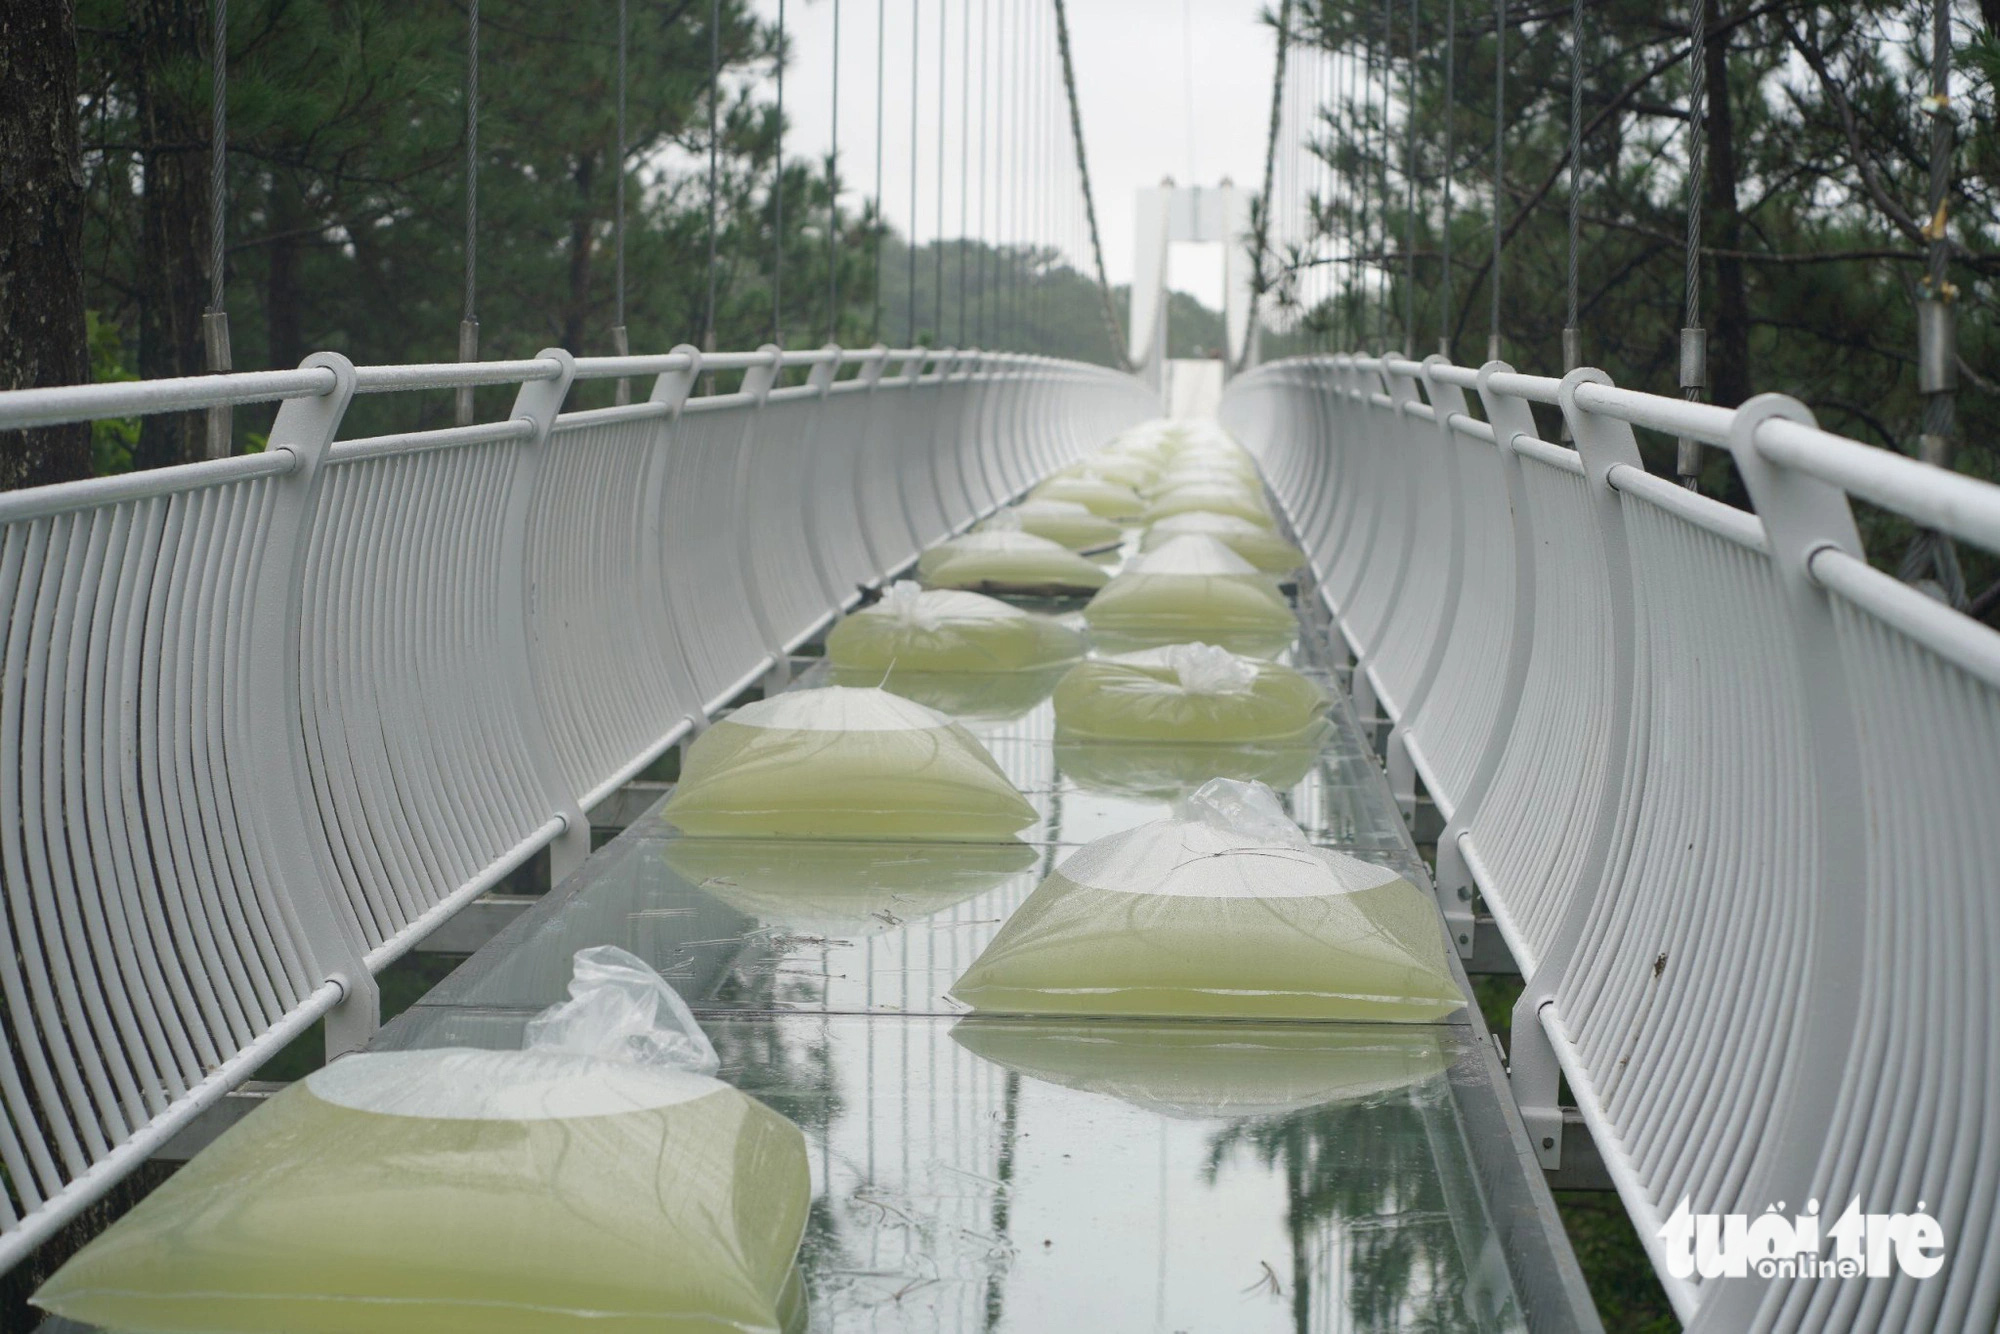 Load testing involves continuously pumping 50 metric tons of water into giant bags placed on the Ngan Thong glass bridge at Love Valley in Da Lat City, located in Lam Dong Province in the Central Highlands, Vietnam. Photo: T.A. / Tuoi Tre